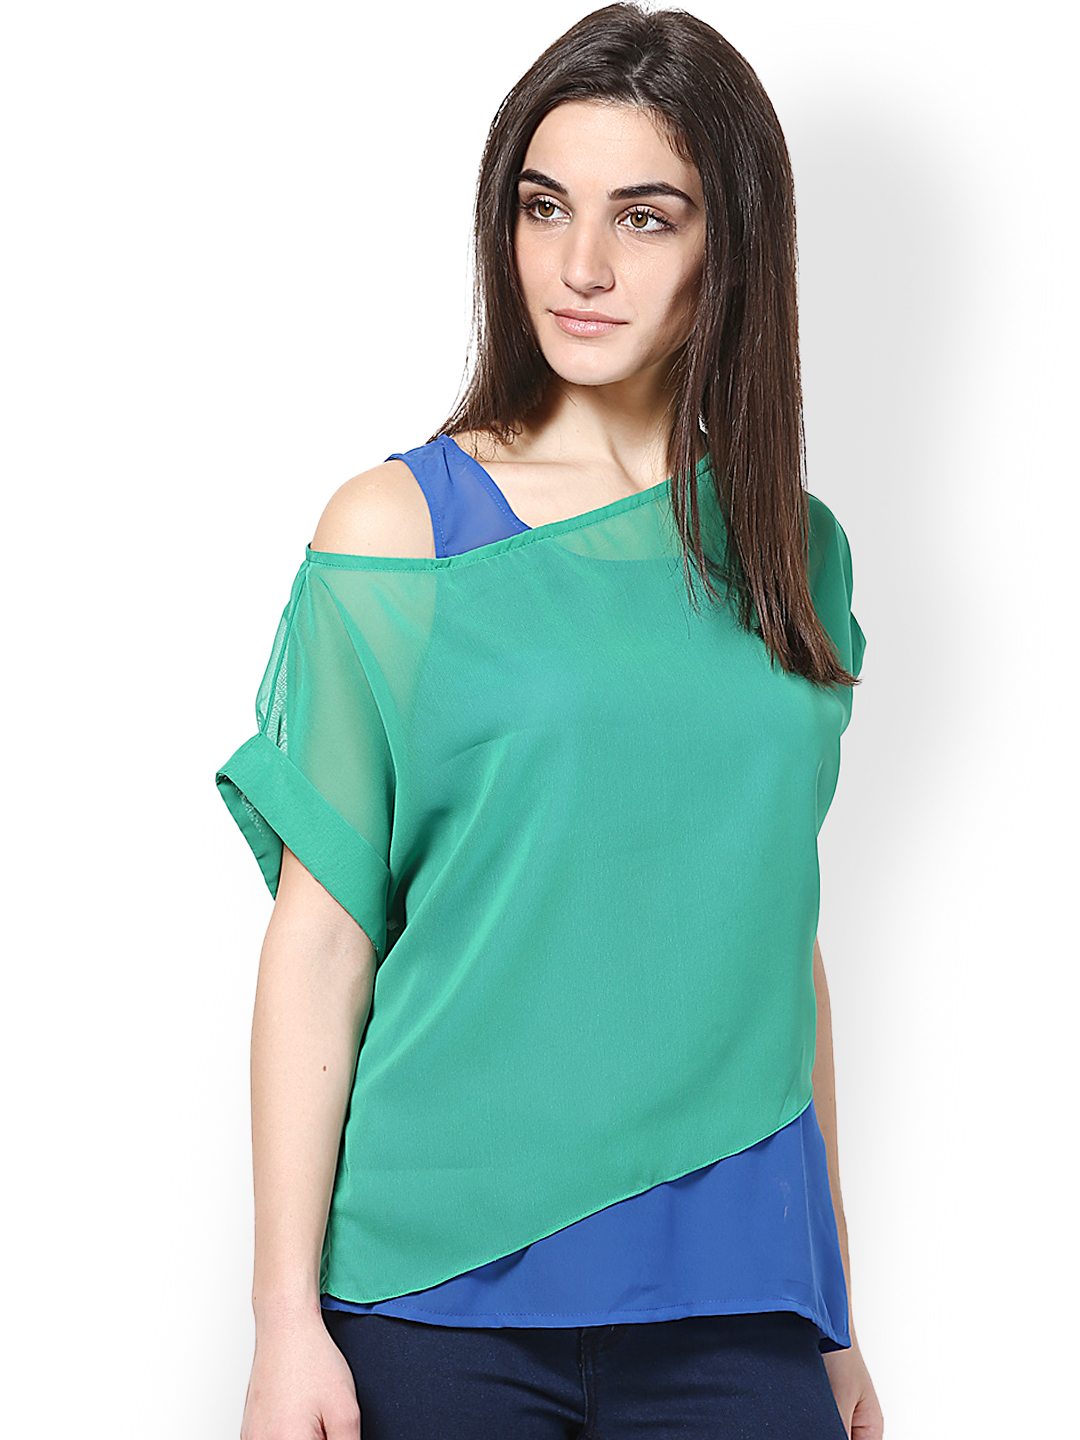 AJh,one sided off shoulder t shirt 